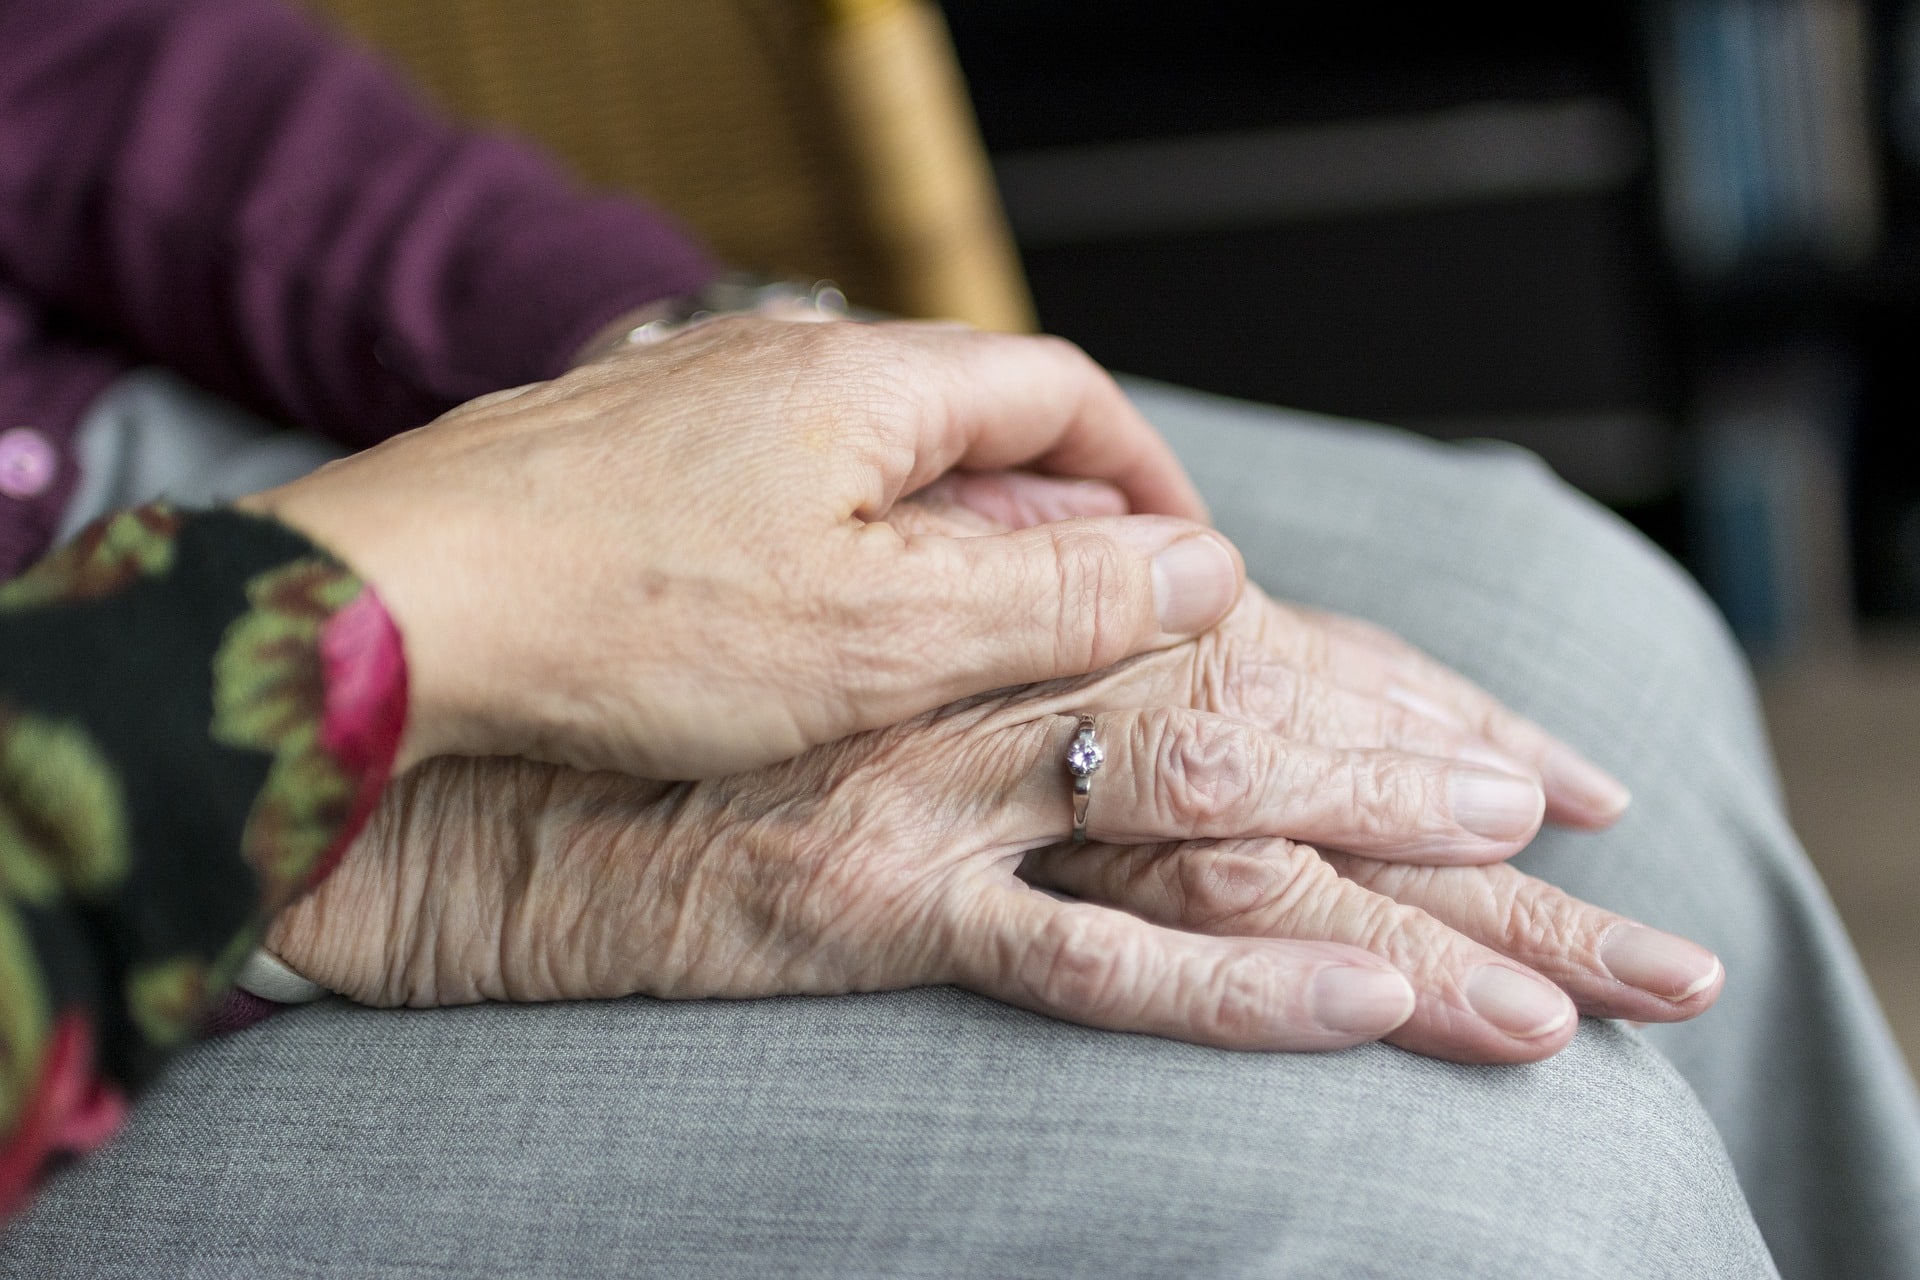 Featured image for “The greater risk of elder abuse in the COVID-19 pandemic”